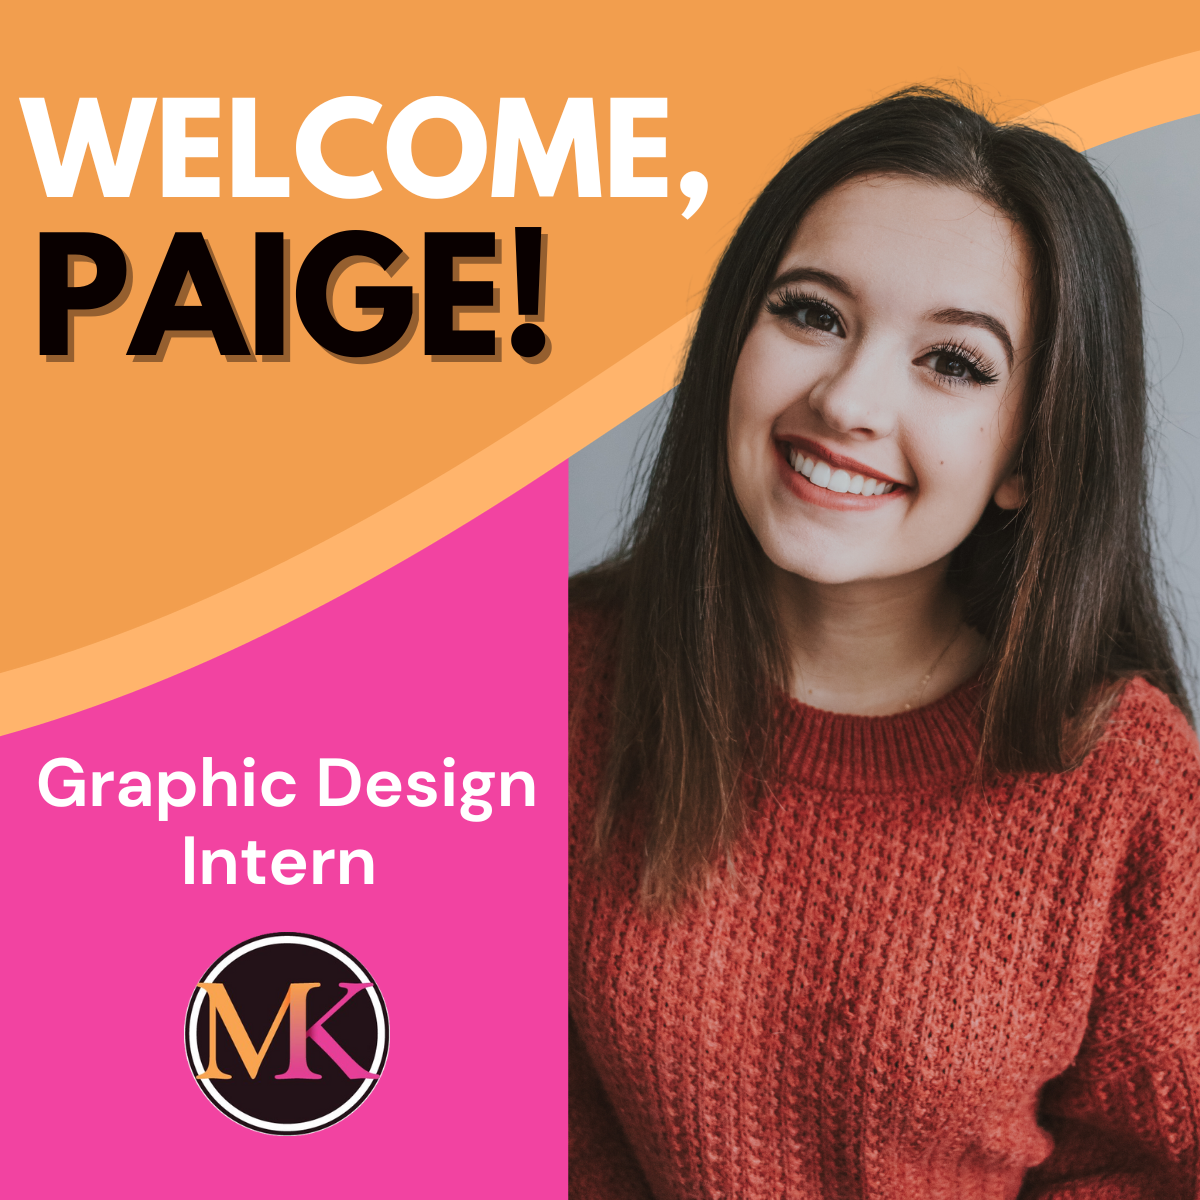 Introducing Mindful Kreative’s Fall Graphic Design Intern: Paige Crawley!